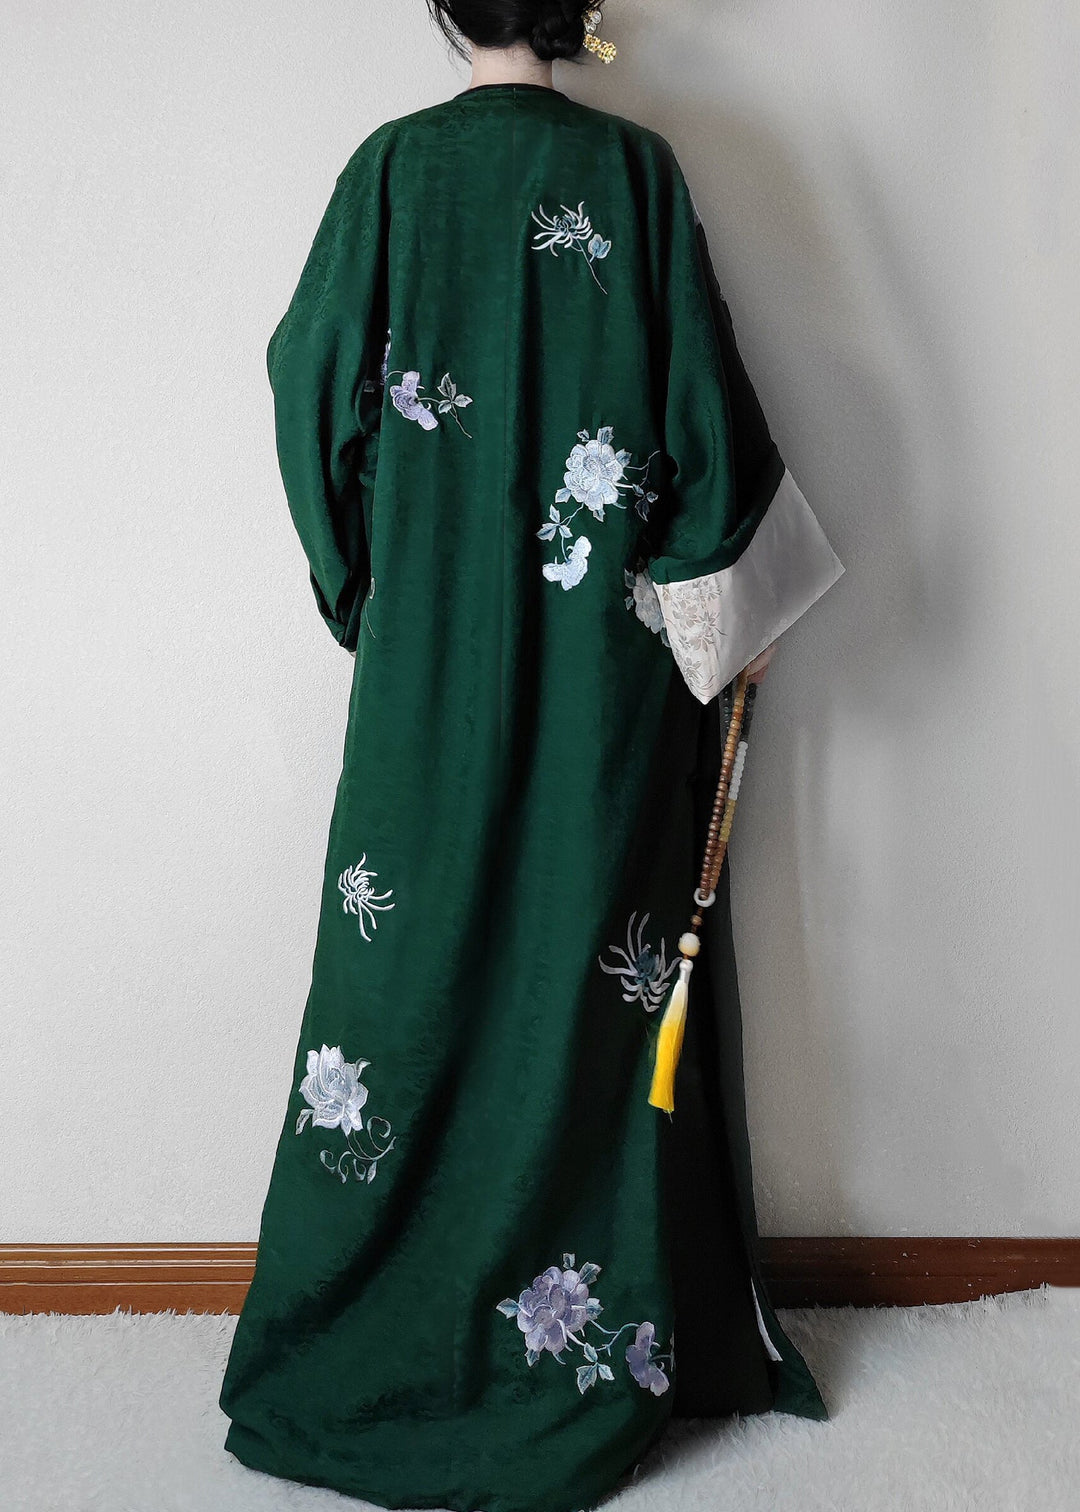 Jacquard Green Embroidered Button Silk Maxi Dresses Long Sleeve